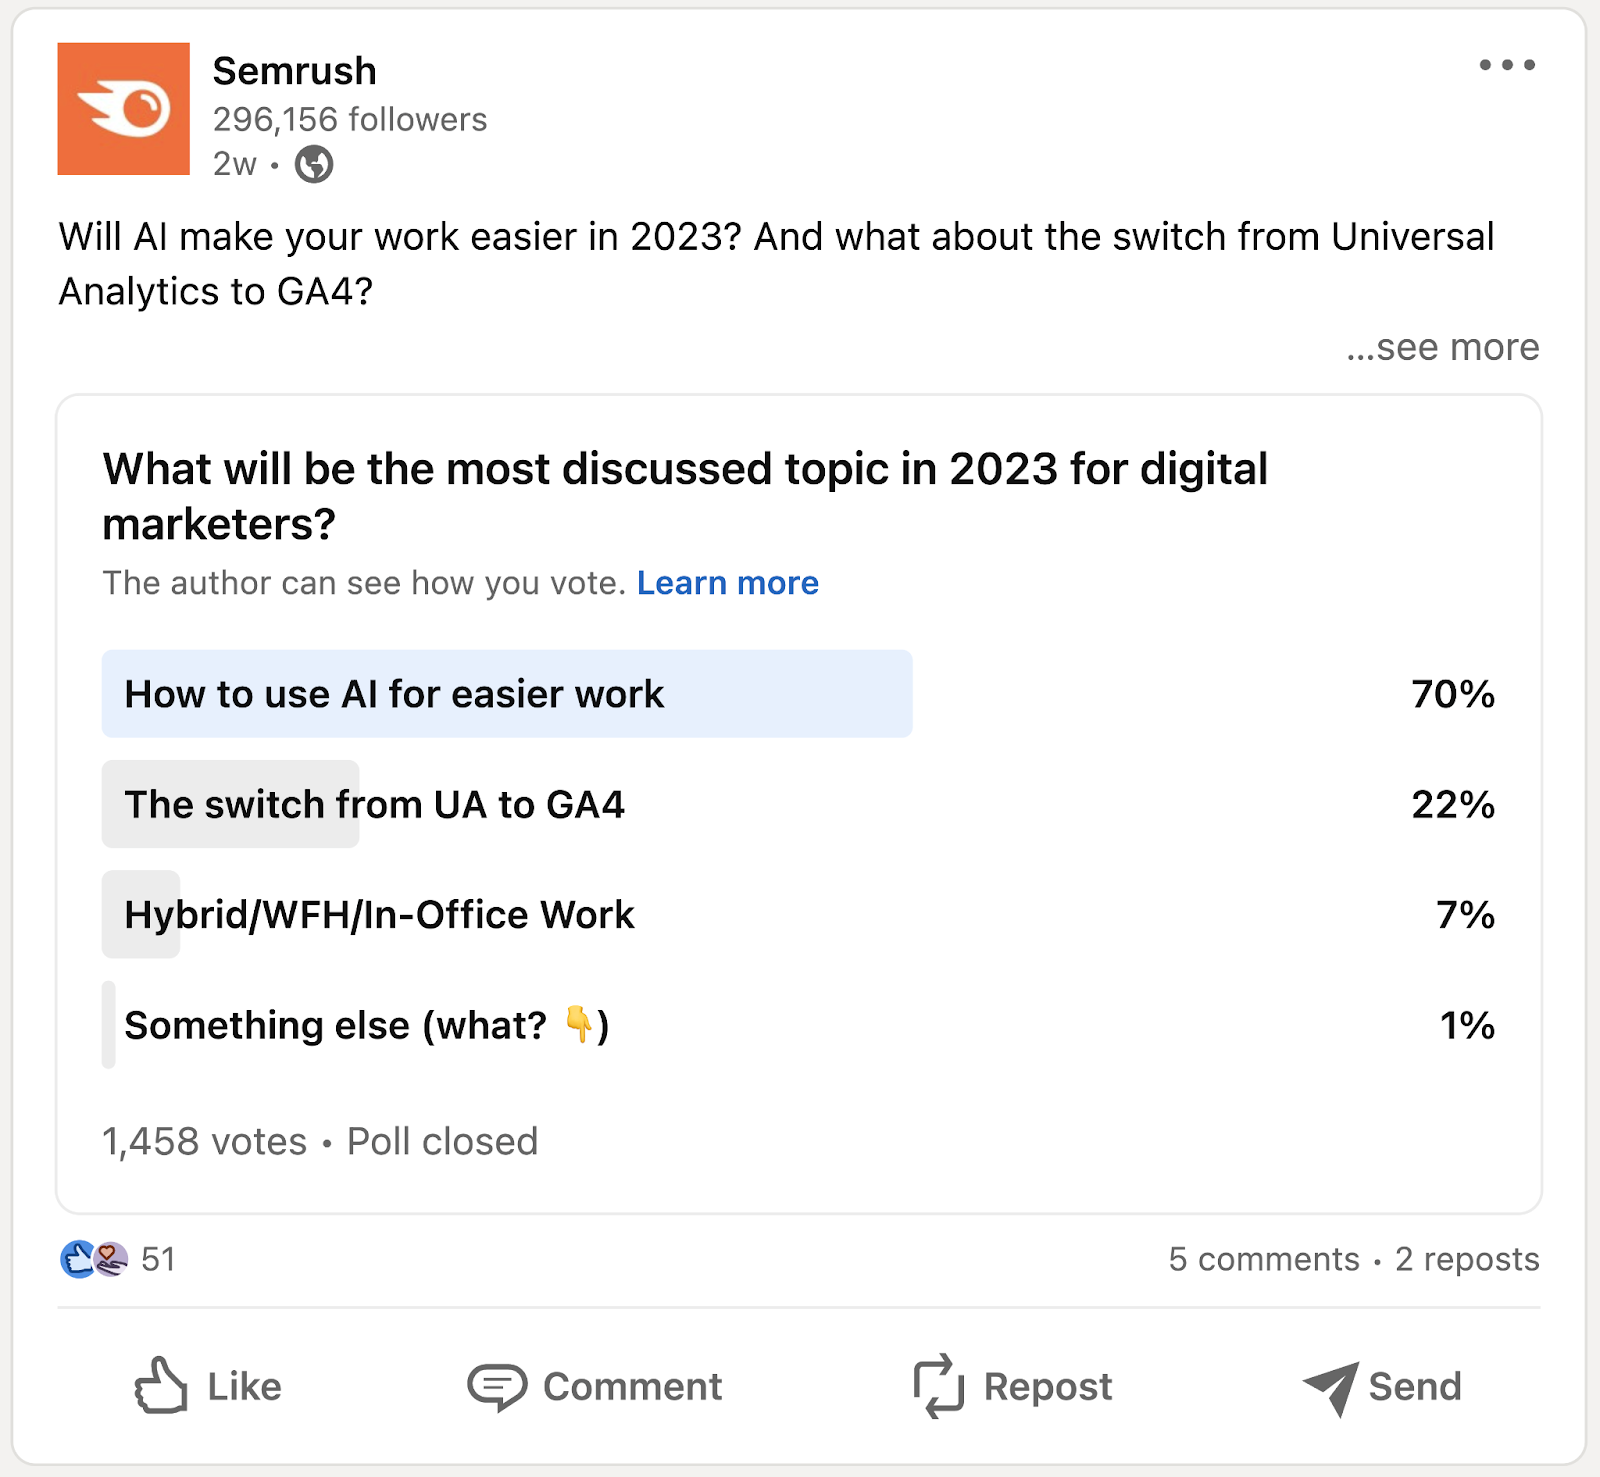 an example of a poll Semrush conducted on LinkedIn on "Will AI make your work easier in 2023? And what about the switch from Universal Analytics to GA4?"